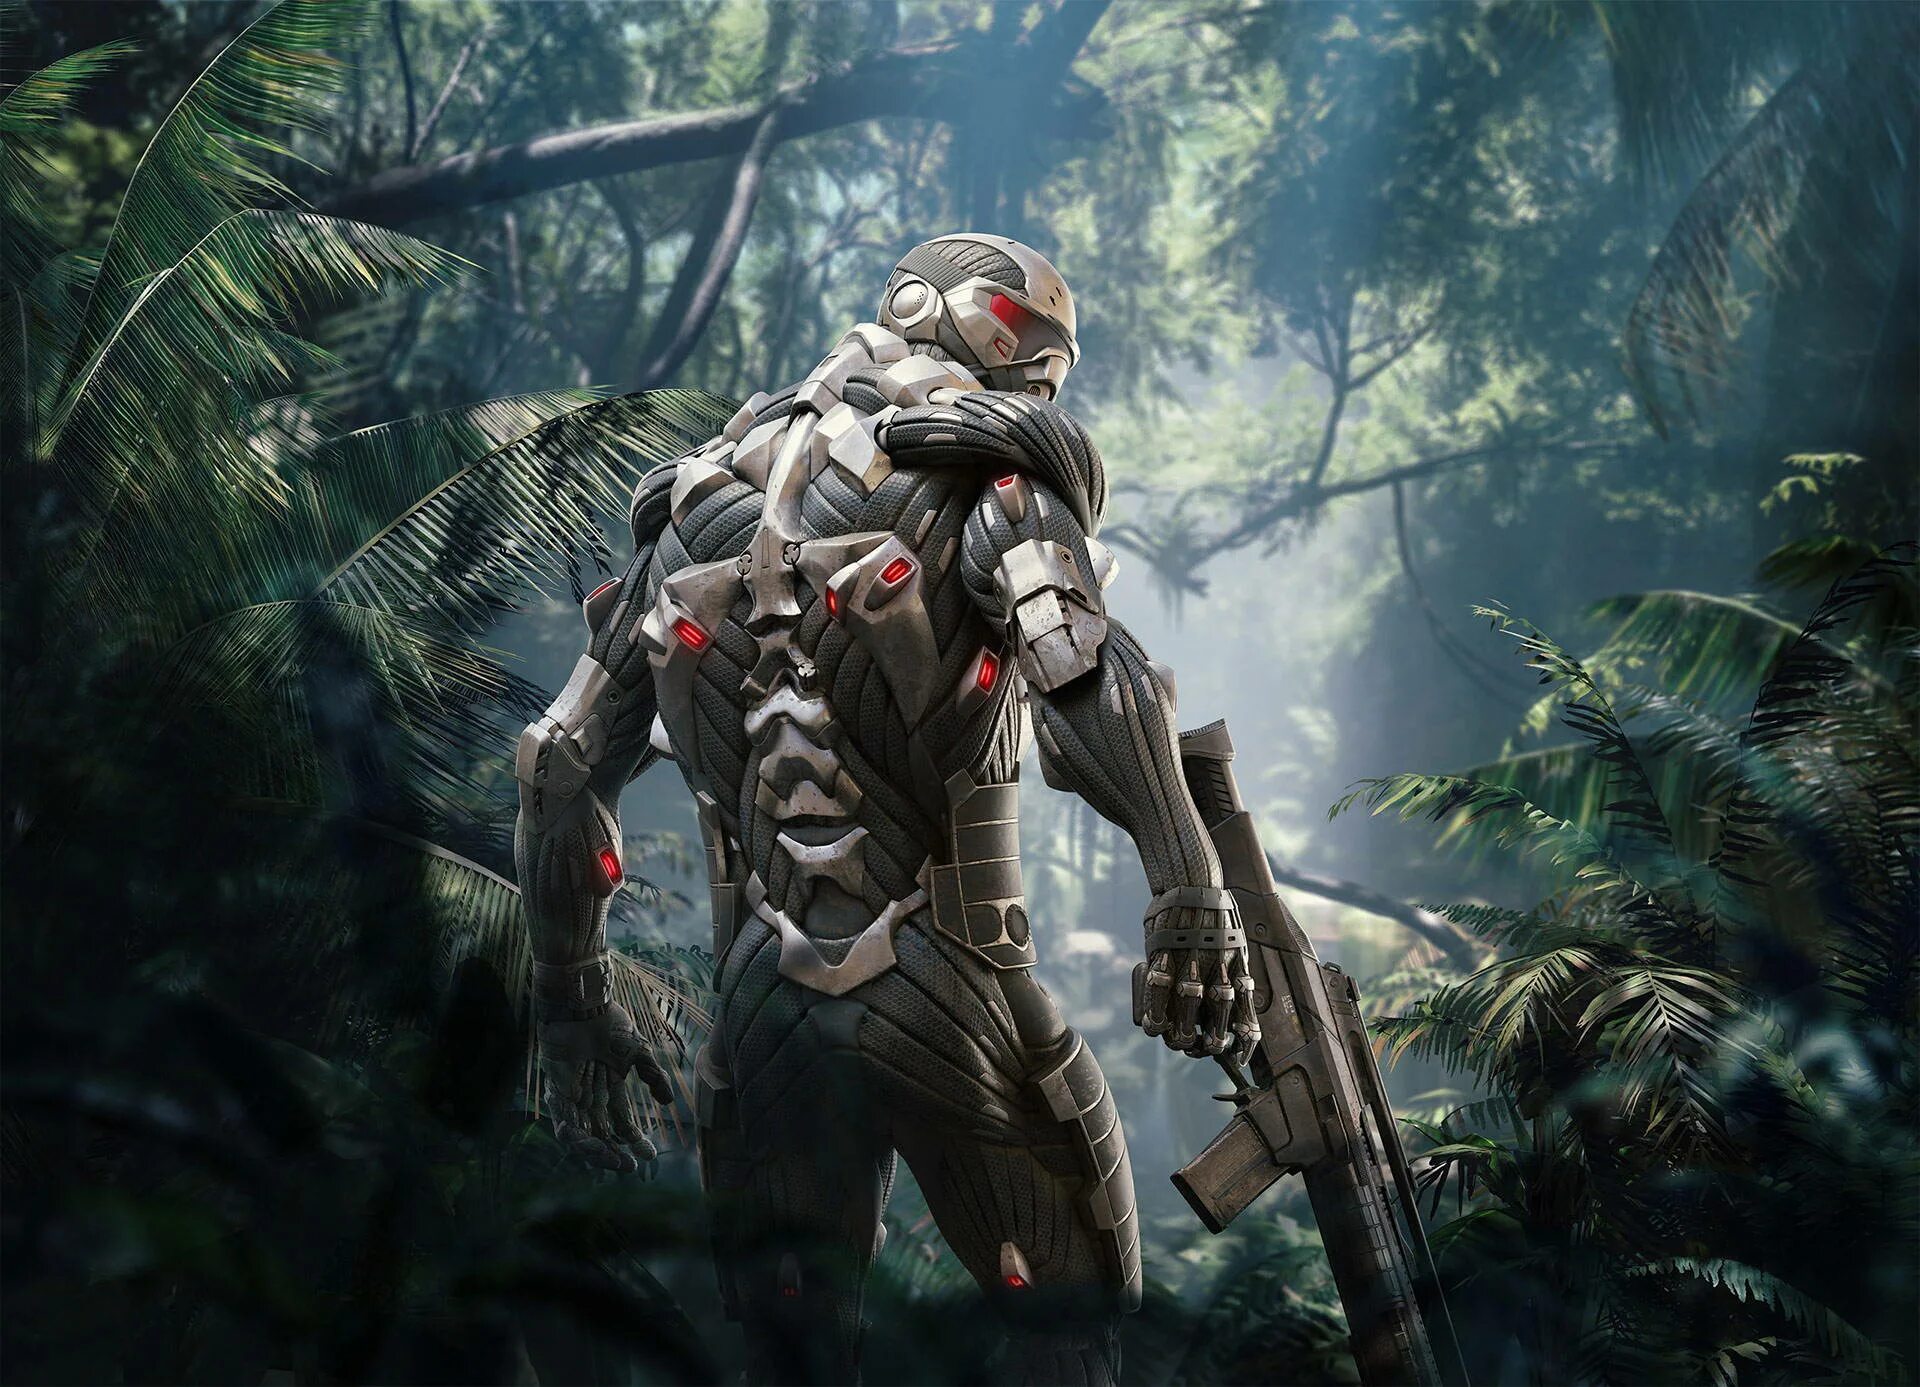 Crysis switch. Крайзис 2 ремастер. Крайсис 4. Crysis Remastered ps4. Crysis Remastered Trilogy (русская версия) (ps4).